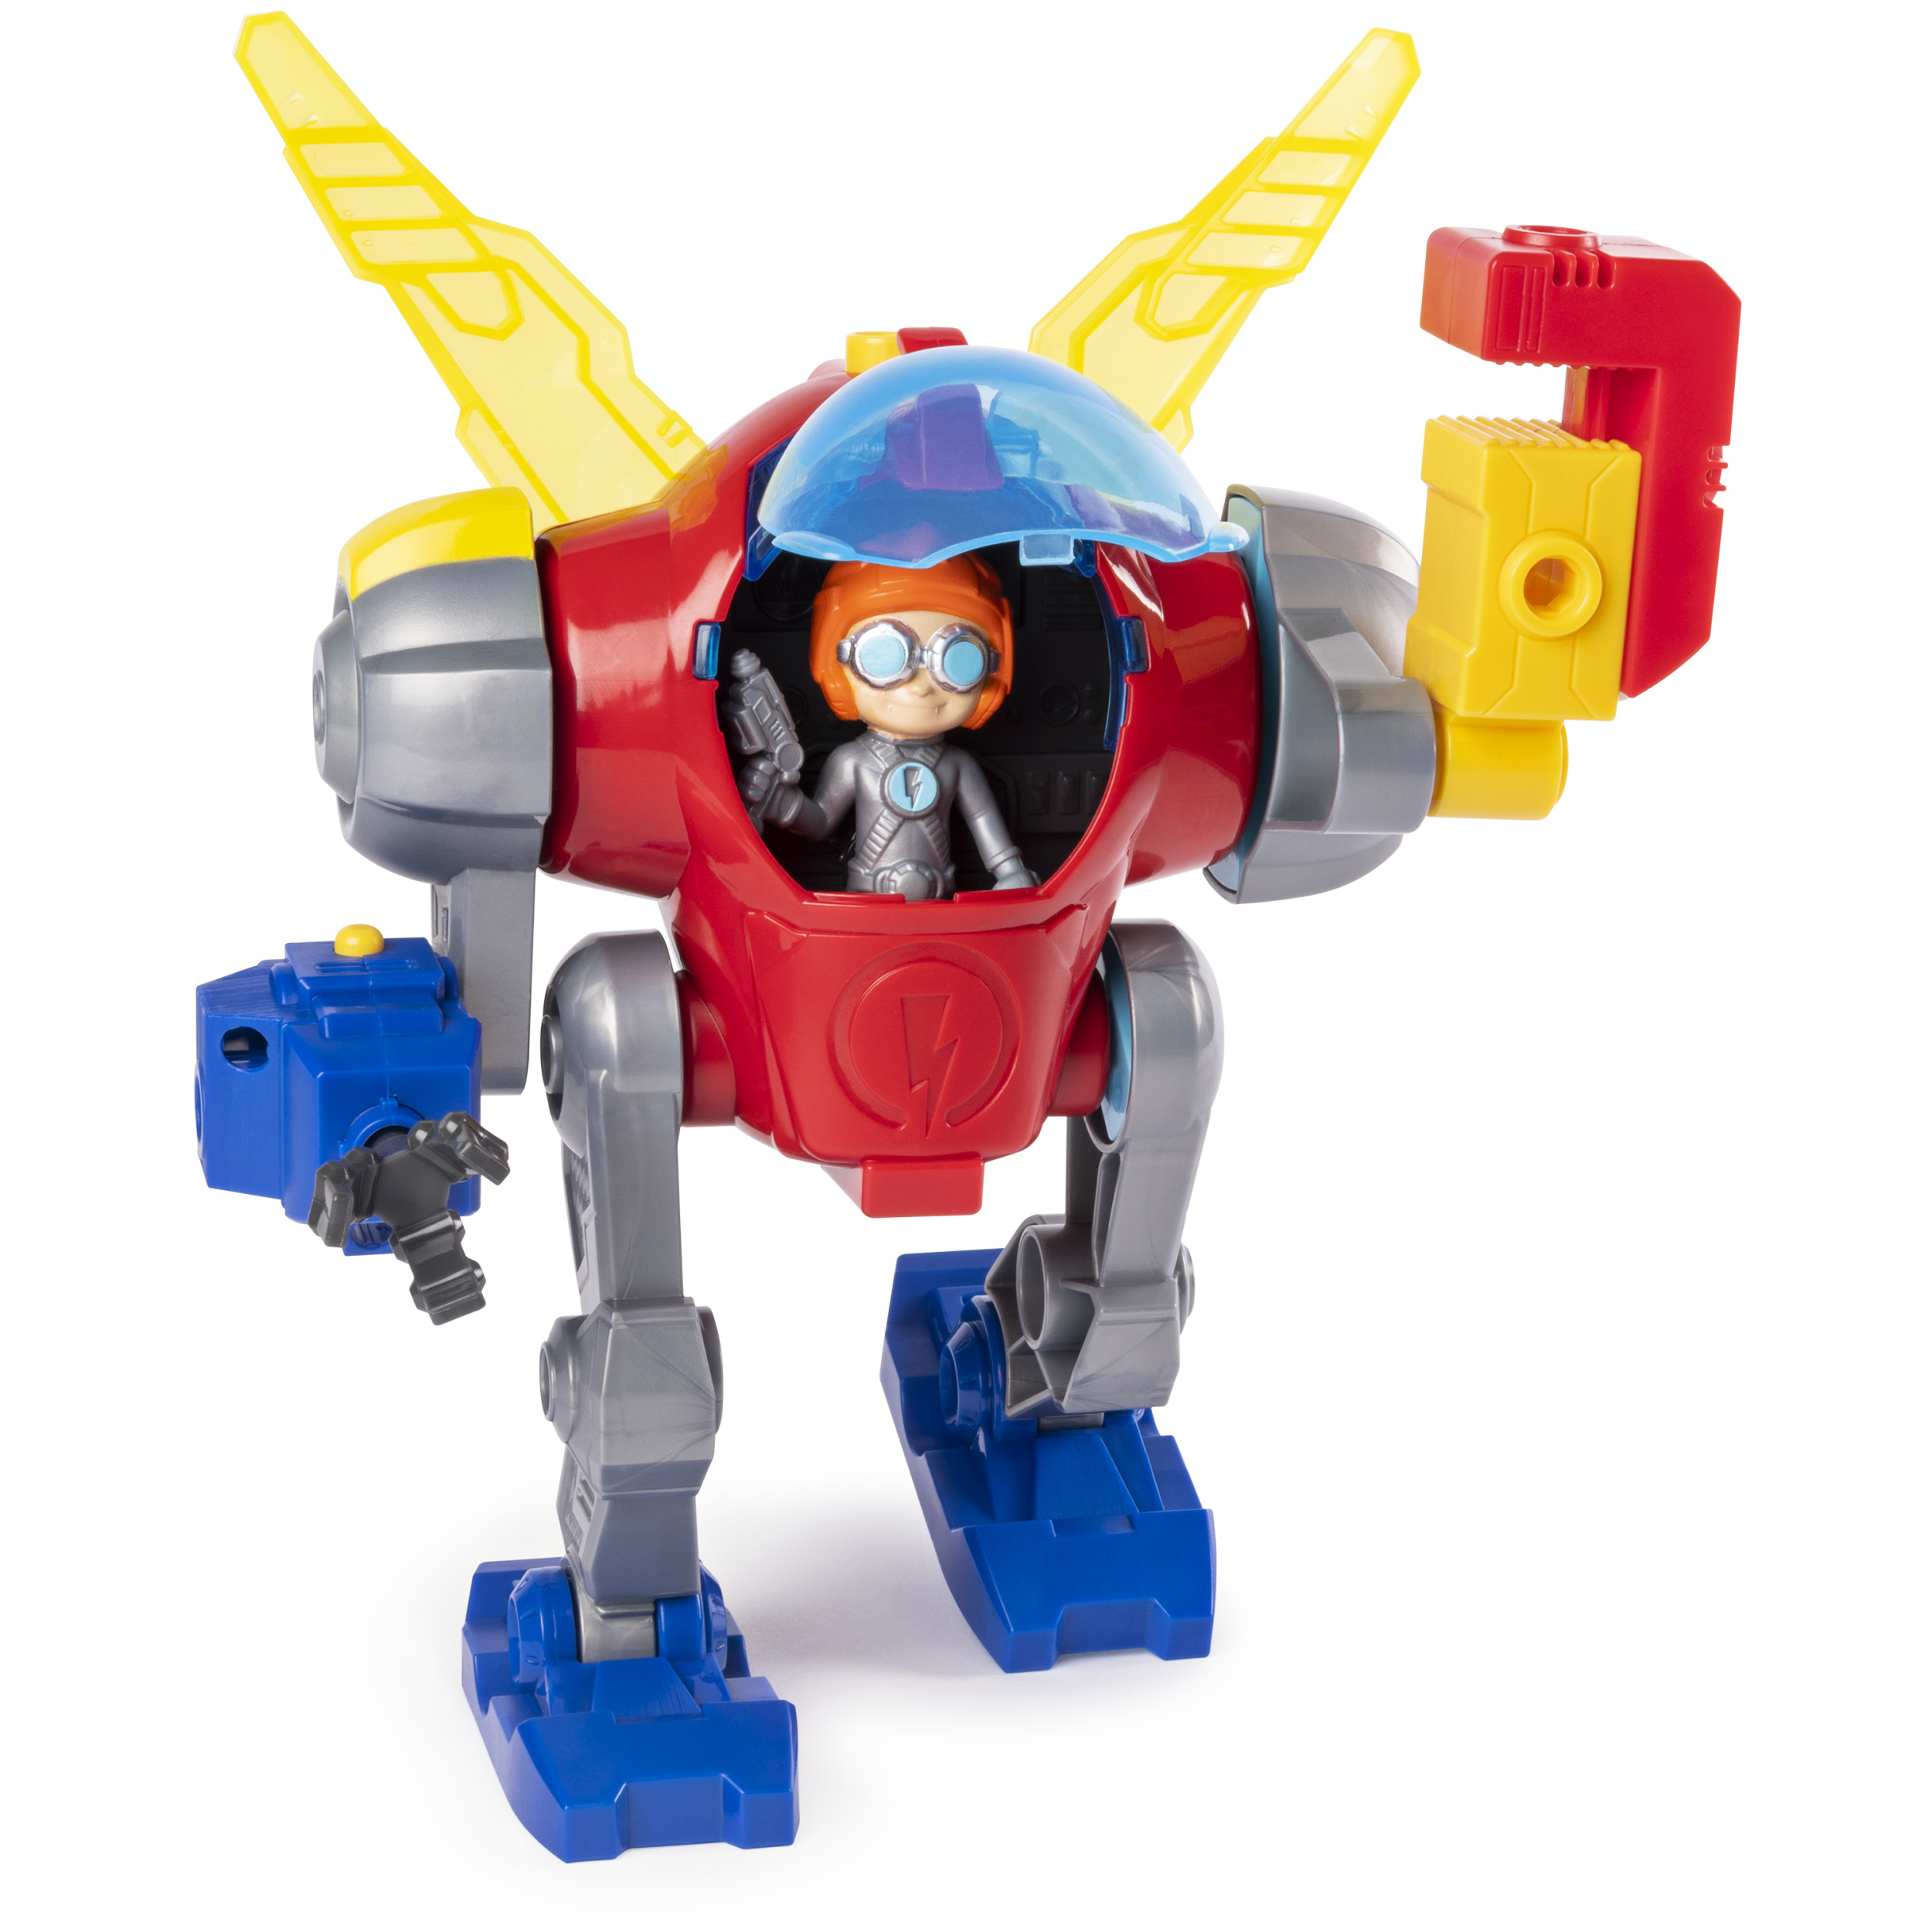 Rusty Rivets, Mechsuit, Snap'n Build Construction with Lights, Sounds, and Rusty Figure, for Ages 3 and up - image 4 of 8